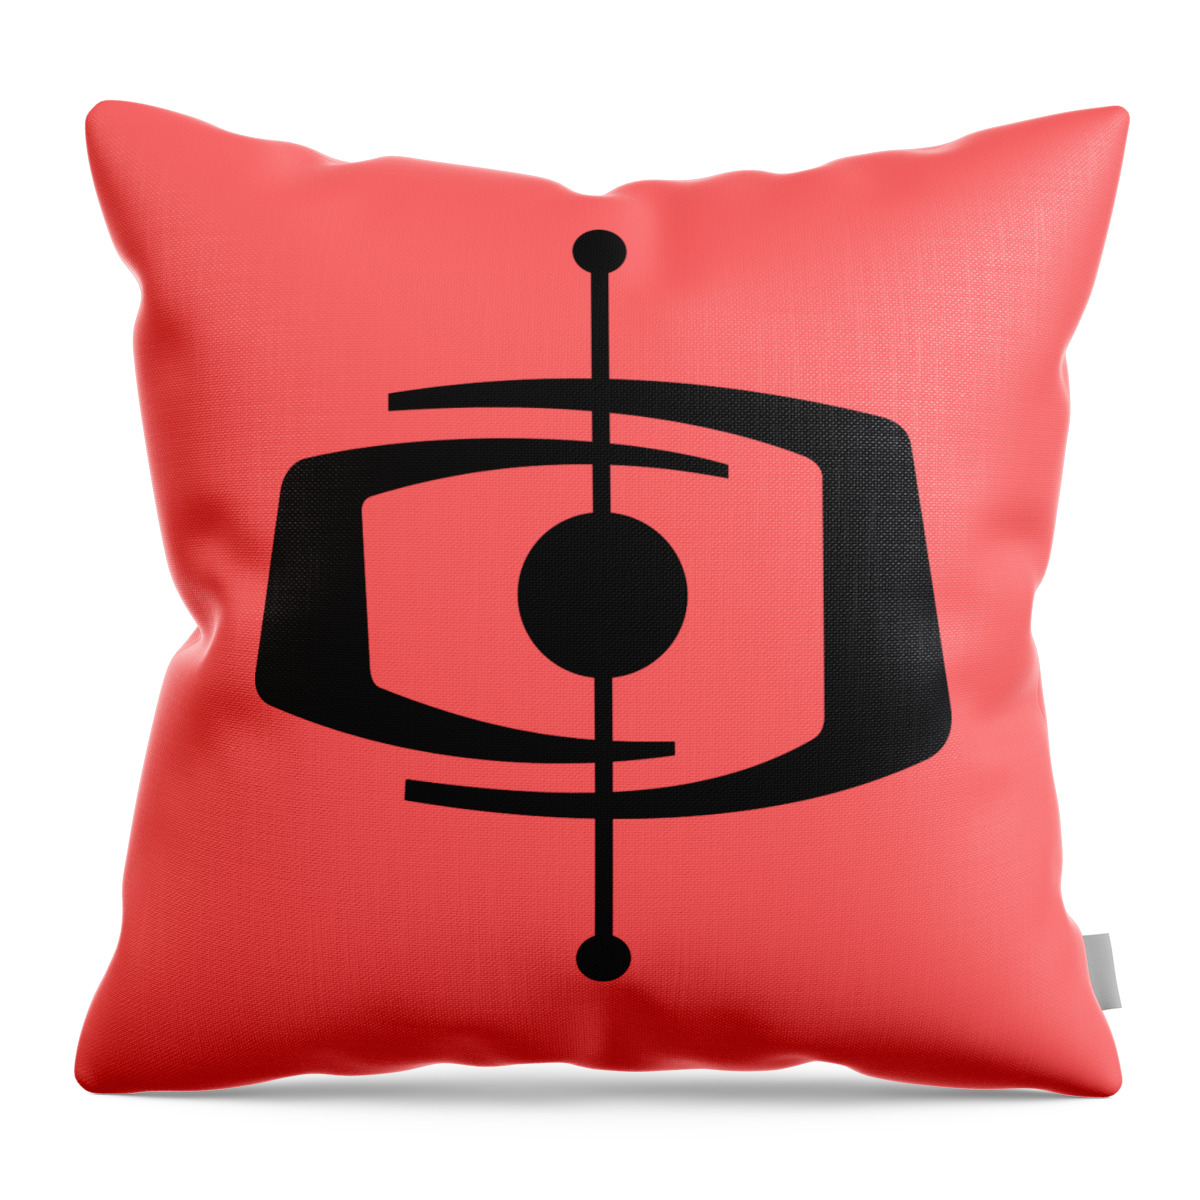  Throw Pillow featuring the digital art Atomic Shape 1 by Donna Mibus